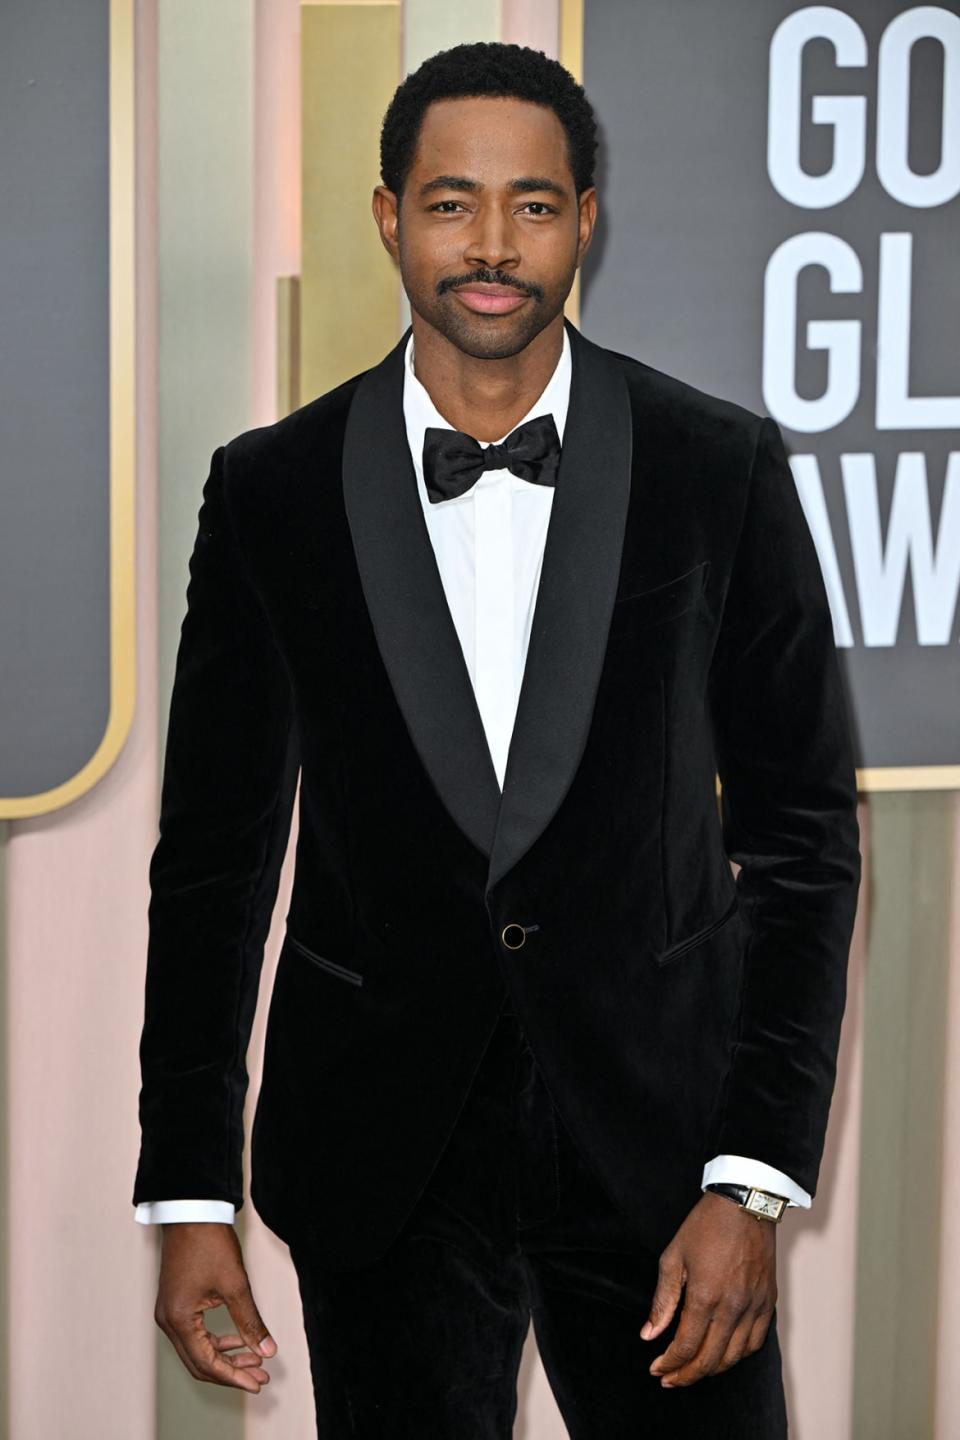 <div class="inline-image__caption"><p>Jay Ellis arrives for the 80th annual Golden Globe Awards at The Beverly Hilton hotel in Beverly Hills, California, on January 10, 2023.</p></div> <div class="inline-image__credit">Frederic J. Brown/AFP via Getty Images</div>